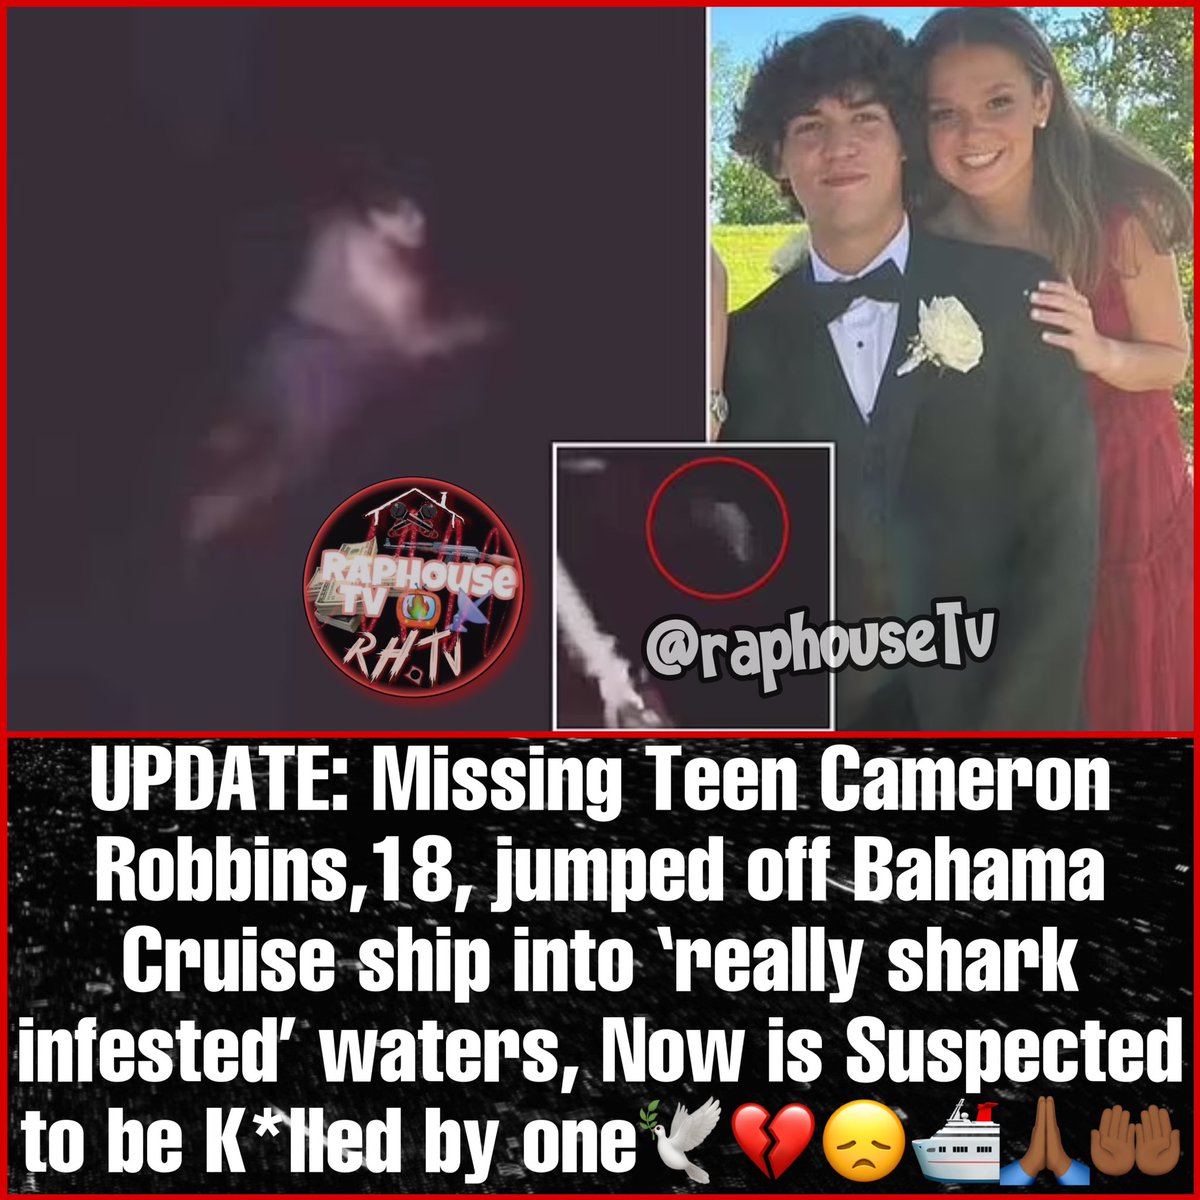 UPDATE: Missing Teen Cameron Robbins,18, who jumped off Bahama Cruise ship as a Dare was in “really shark infested waters” , Now is Suspected to be Killed by one🕊️💔😞🛳️🙏🏾🤲🏾